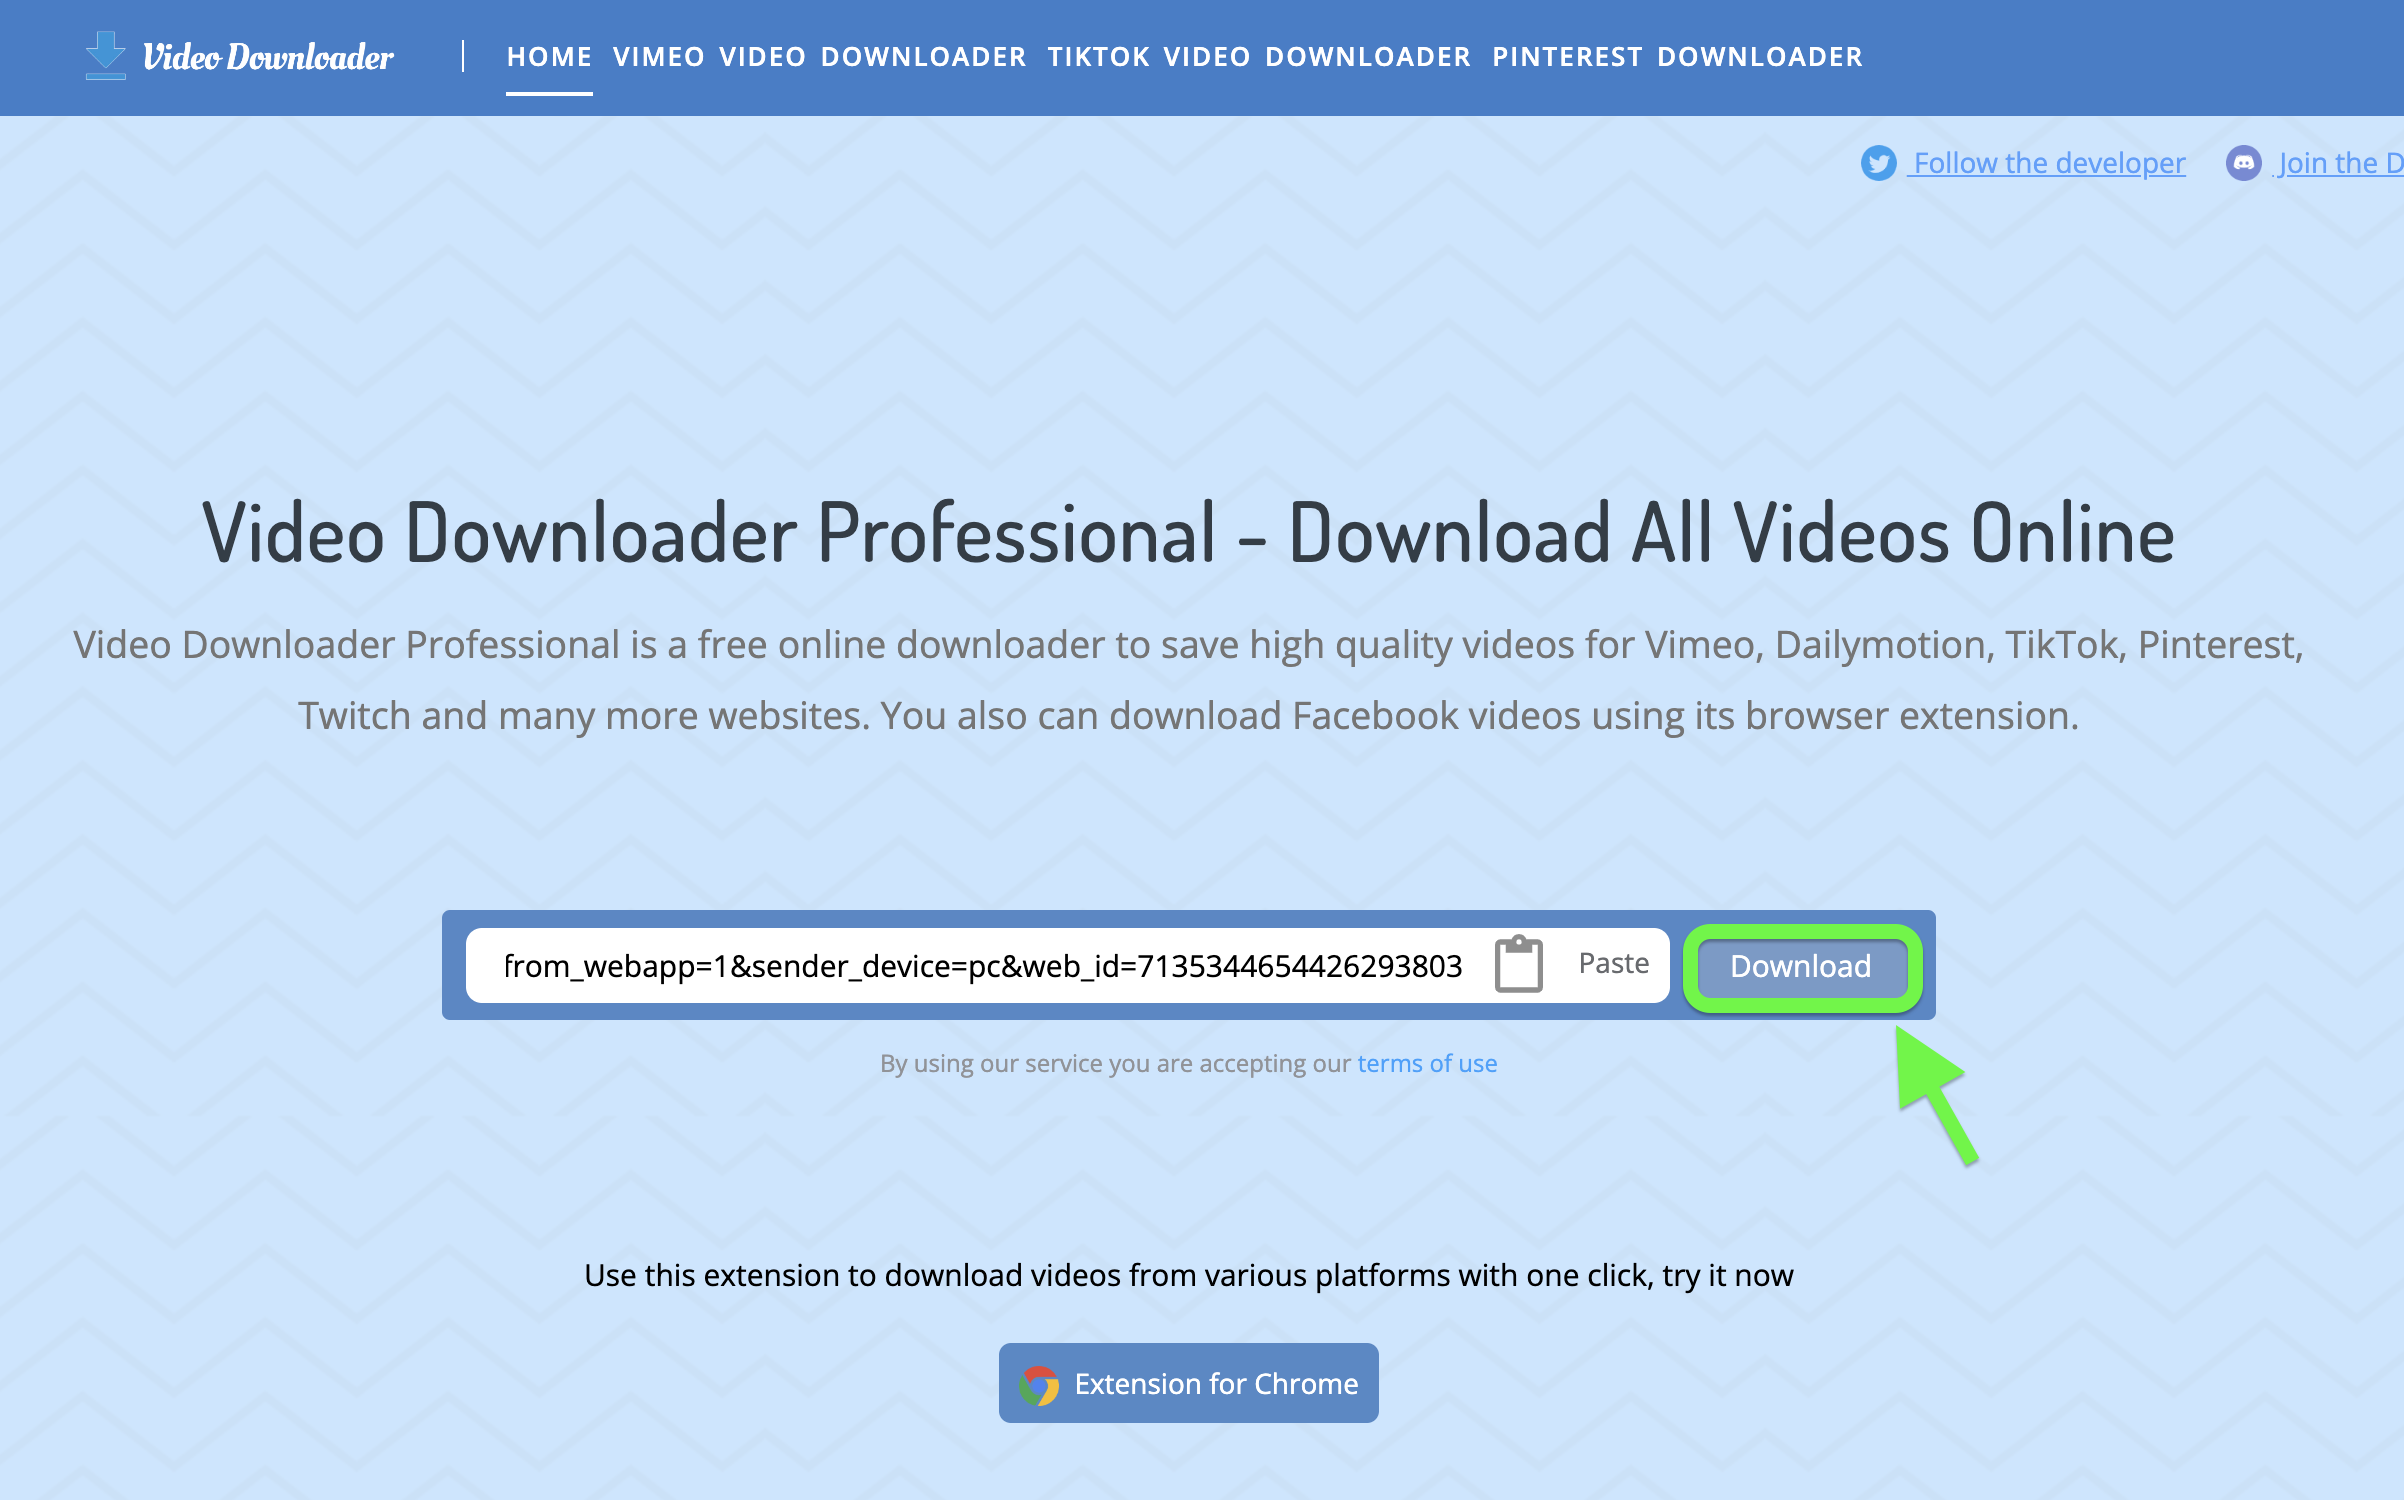 Open the Video Downloader Professional website and paste the copied link in the input box;